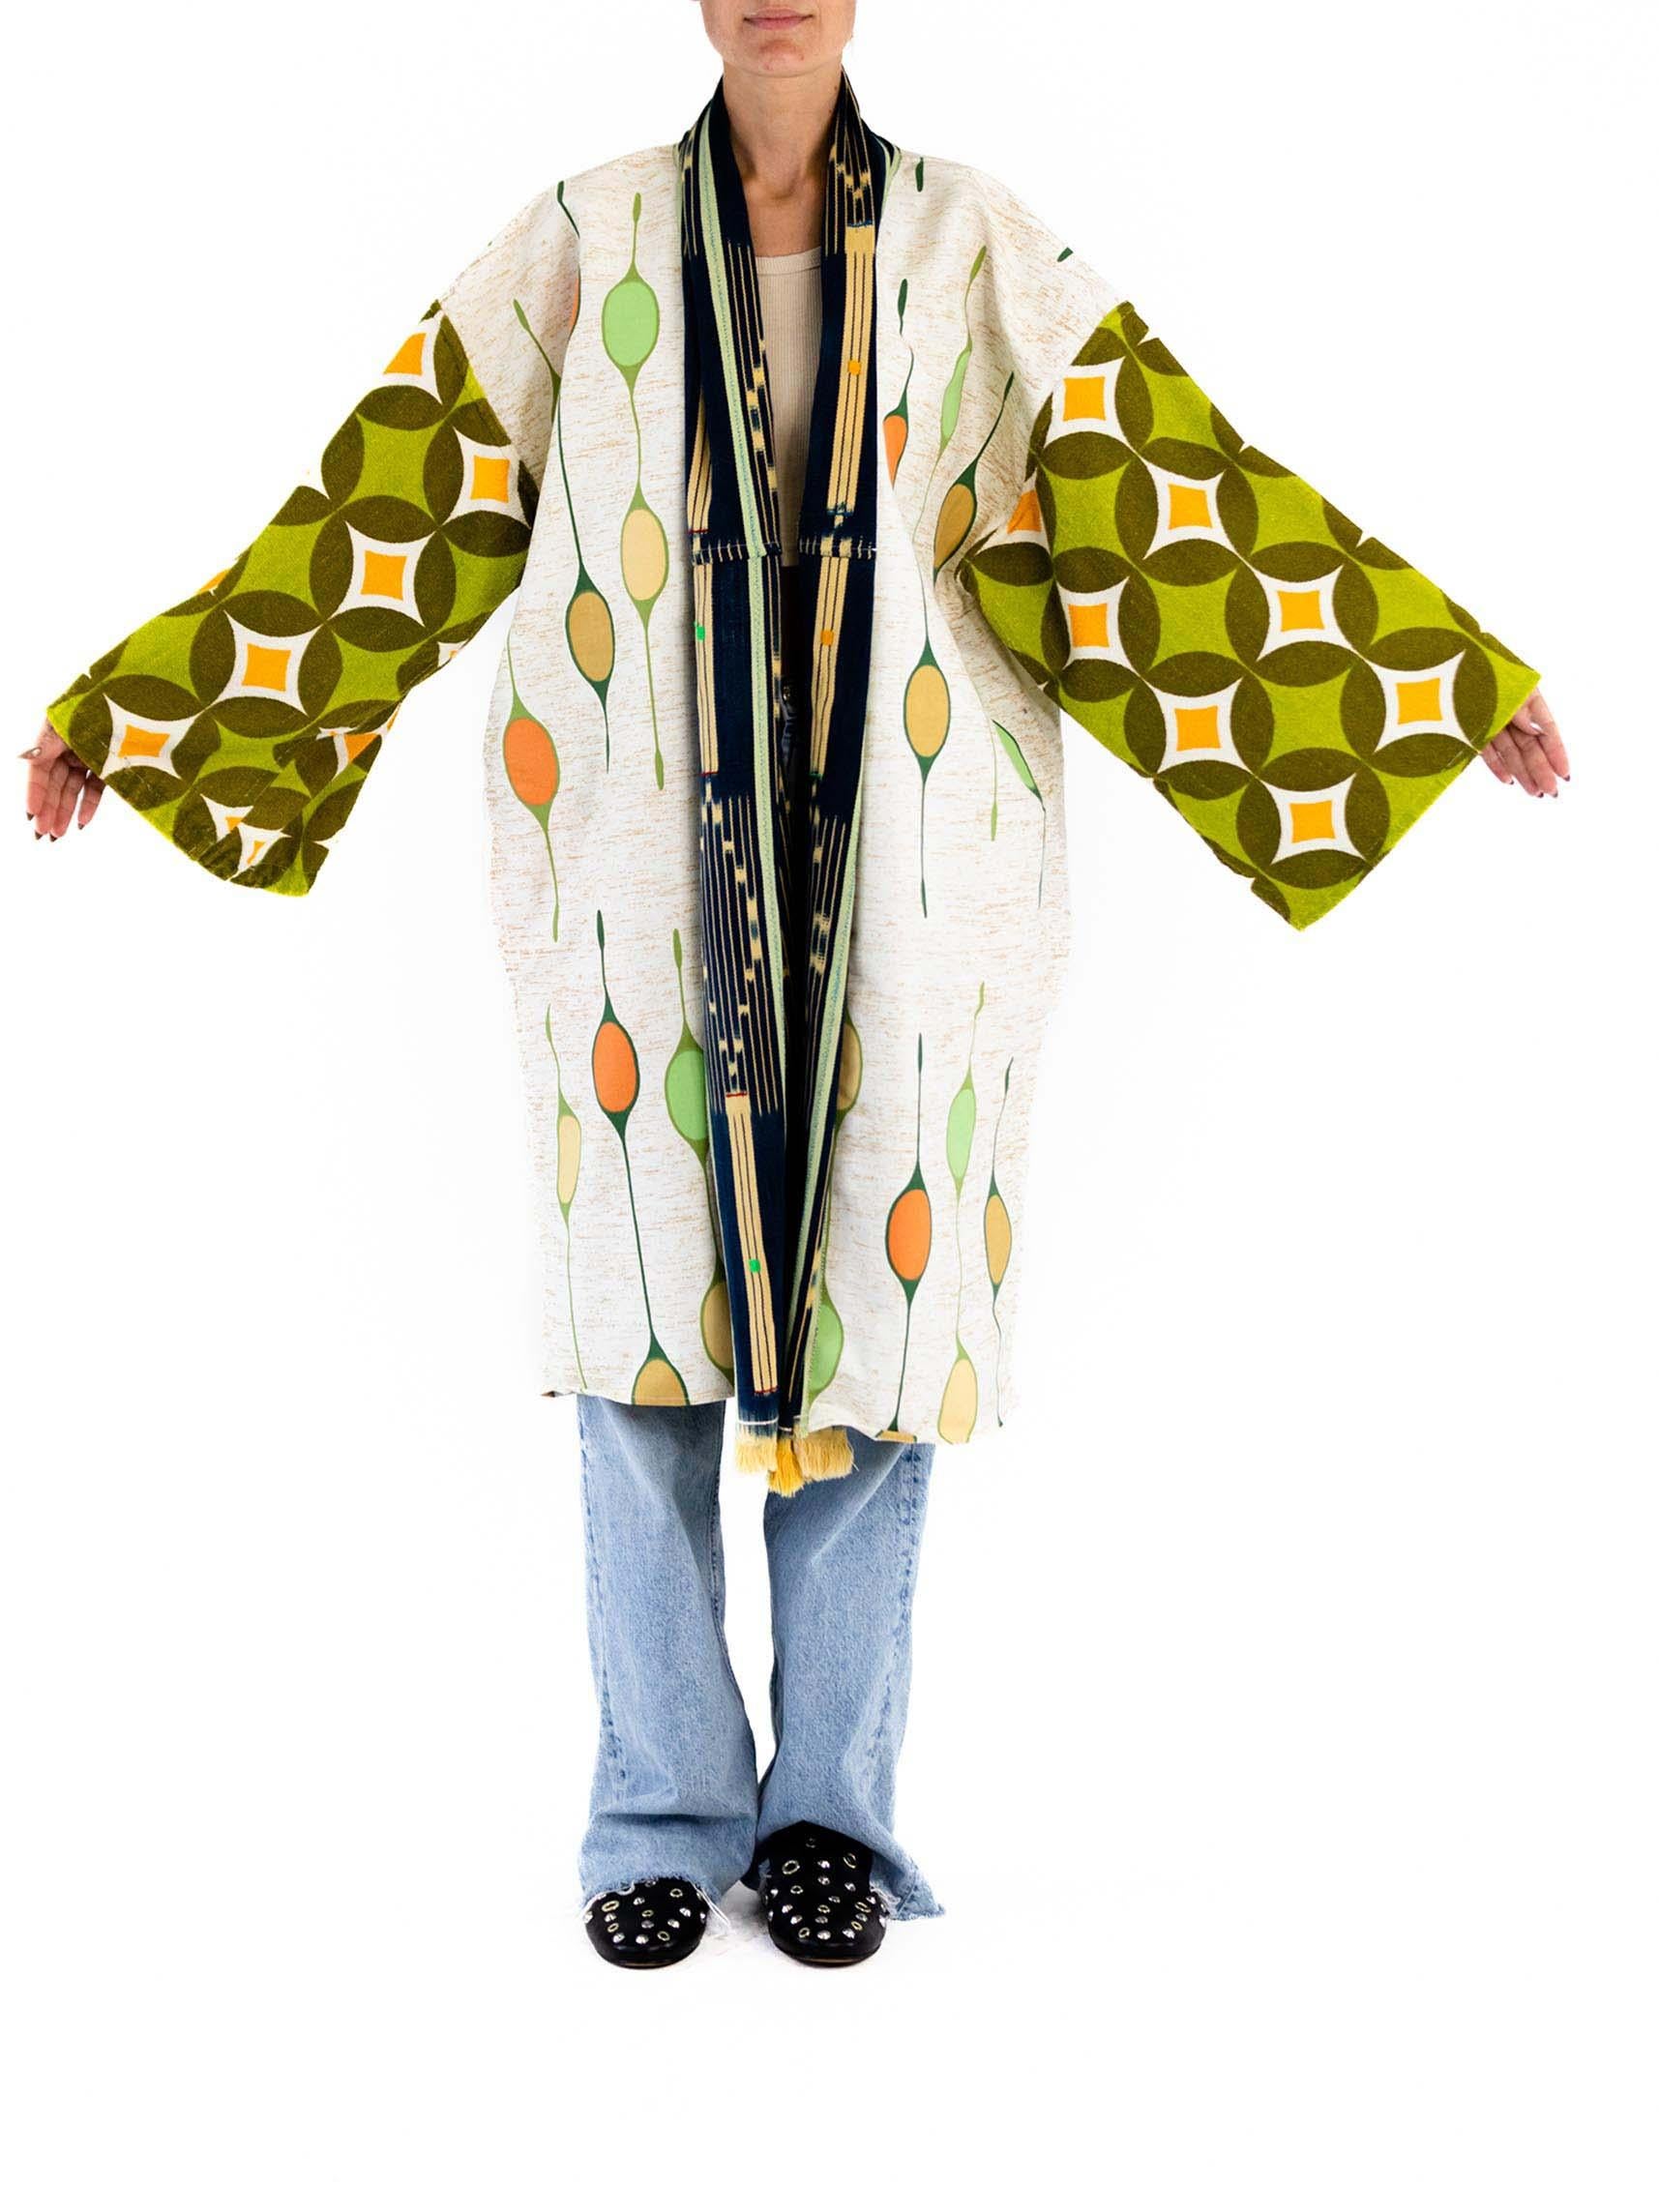 MORPHEW COLLECTION Cream & Green Cotton Tear Drop Design Beach Coat Duster In Excellent Condition For Sale In New York, NY